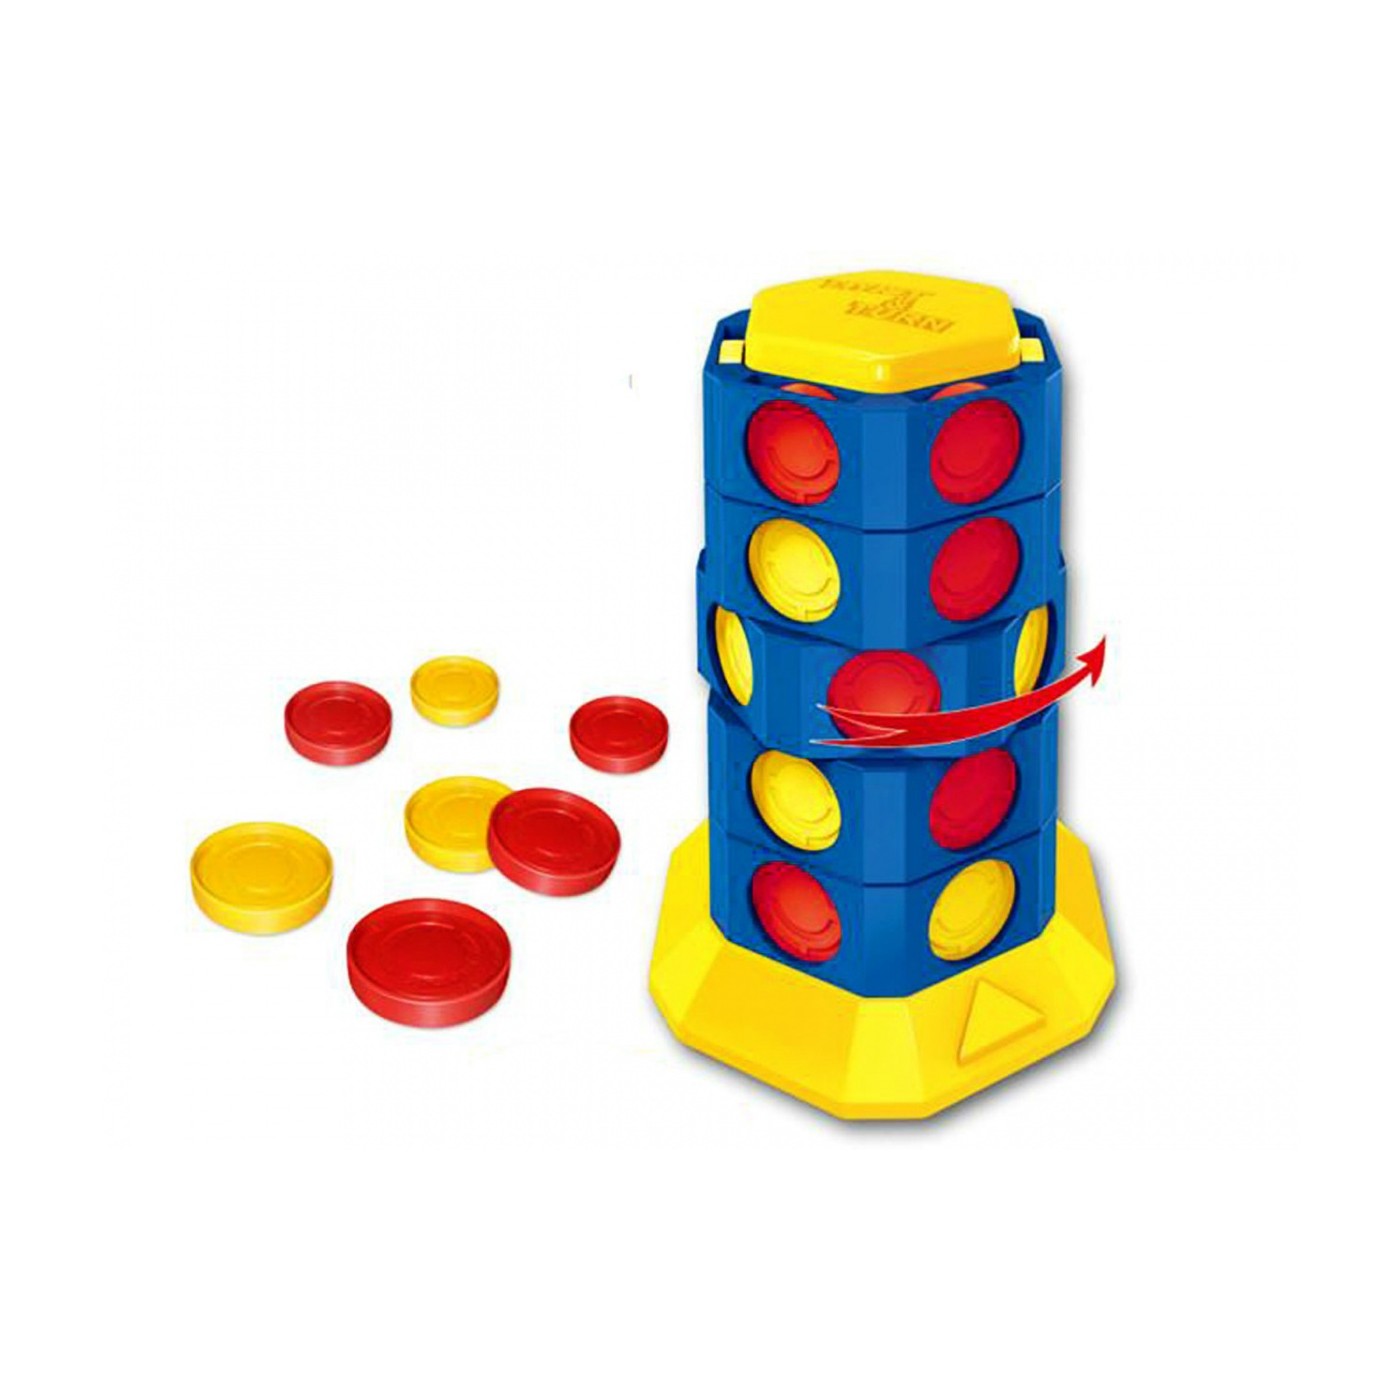 Puzzle game CONNECT 4-TWIST TURN Line Up